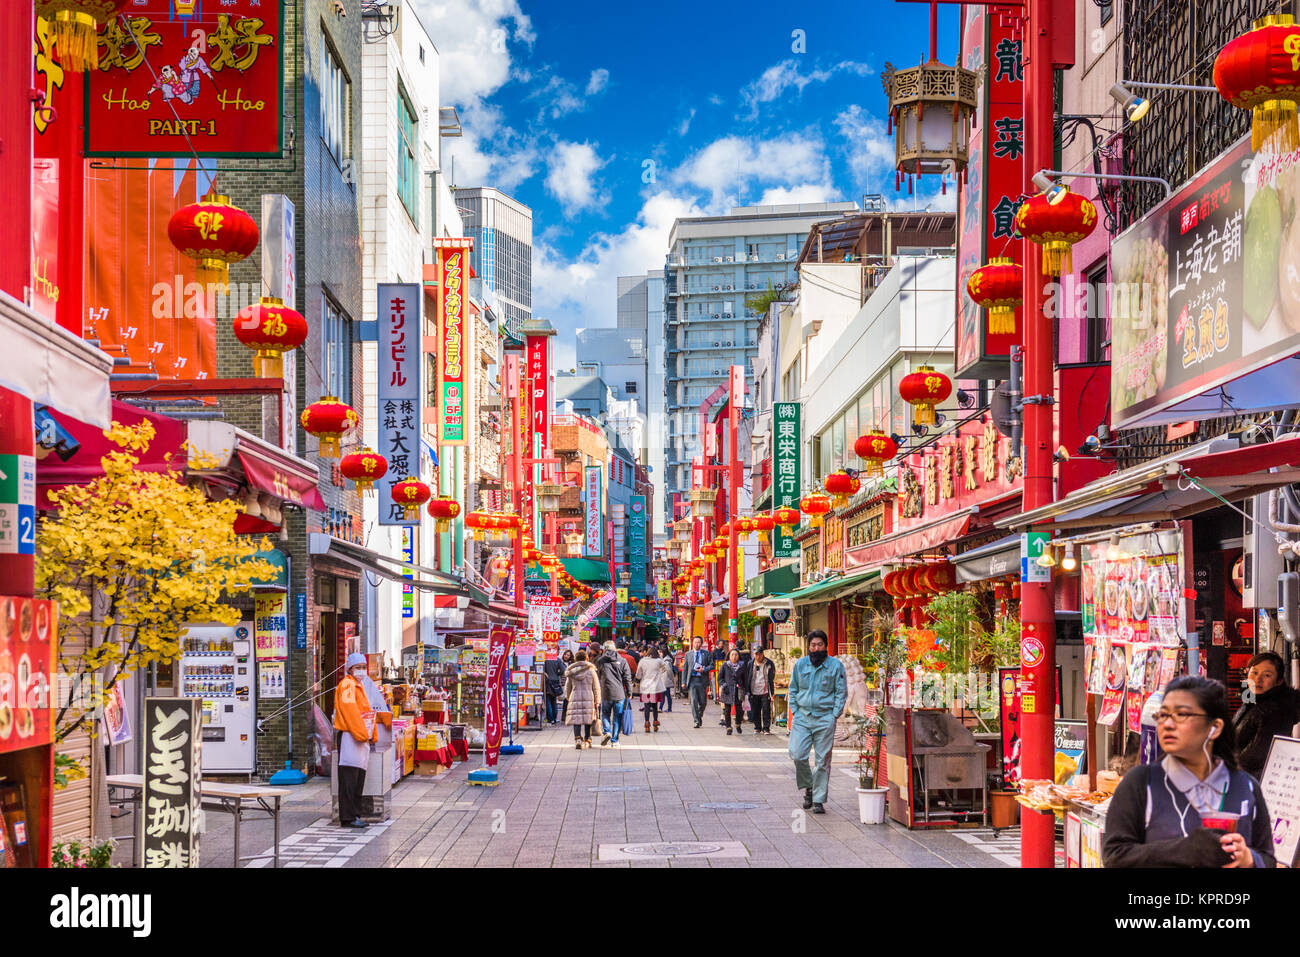 KOBE, JAPAN - DECEMBER 17, 2015: Chinatown district of Kobe at the square and pavilion. It is one of three designated Chinatowns in Japan. Stock Photo